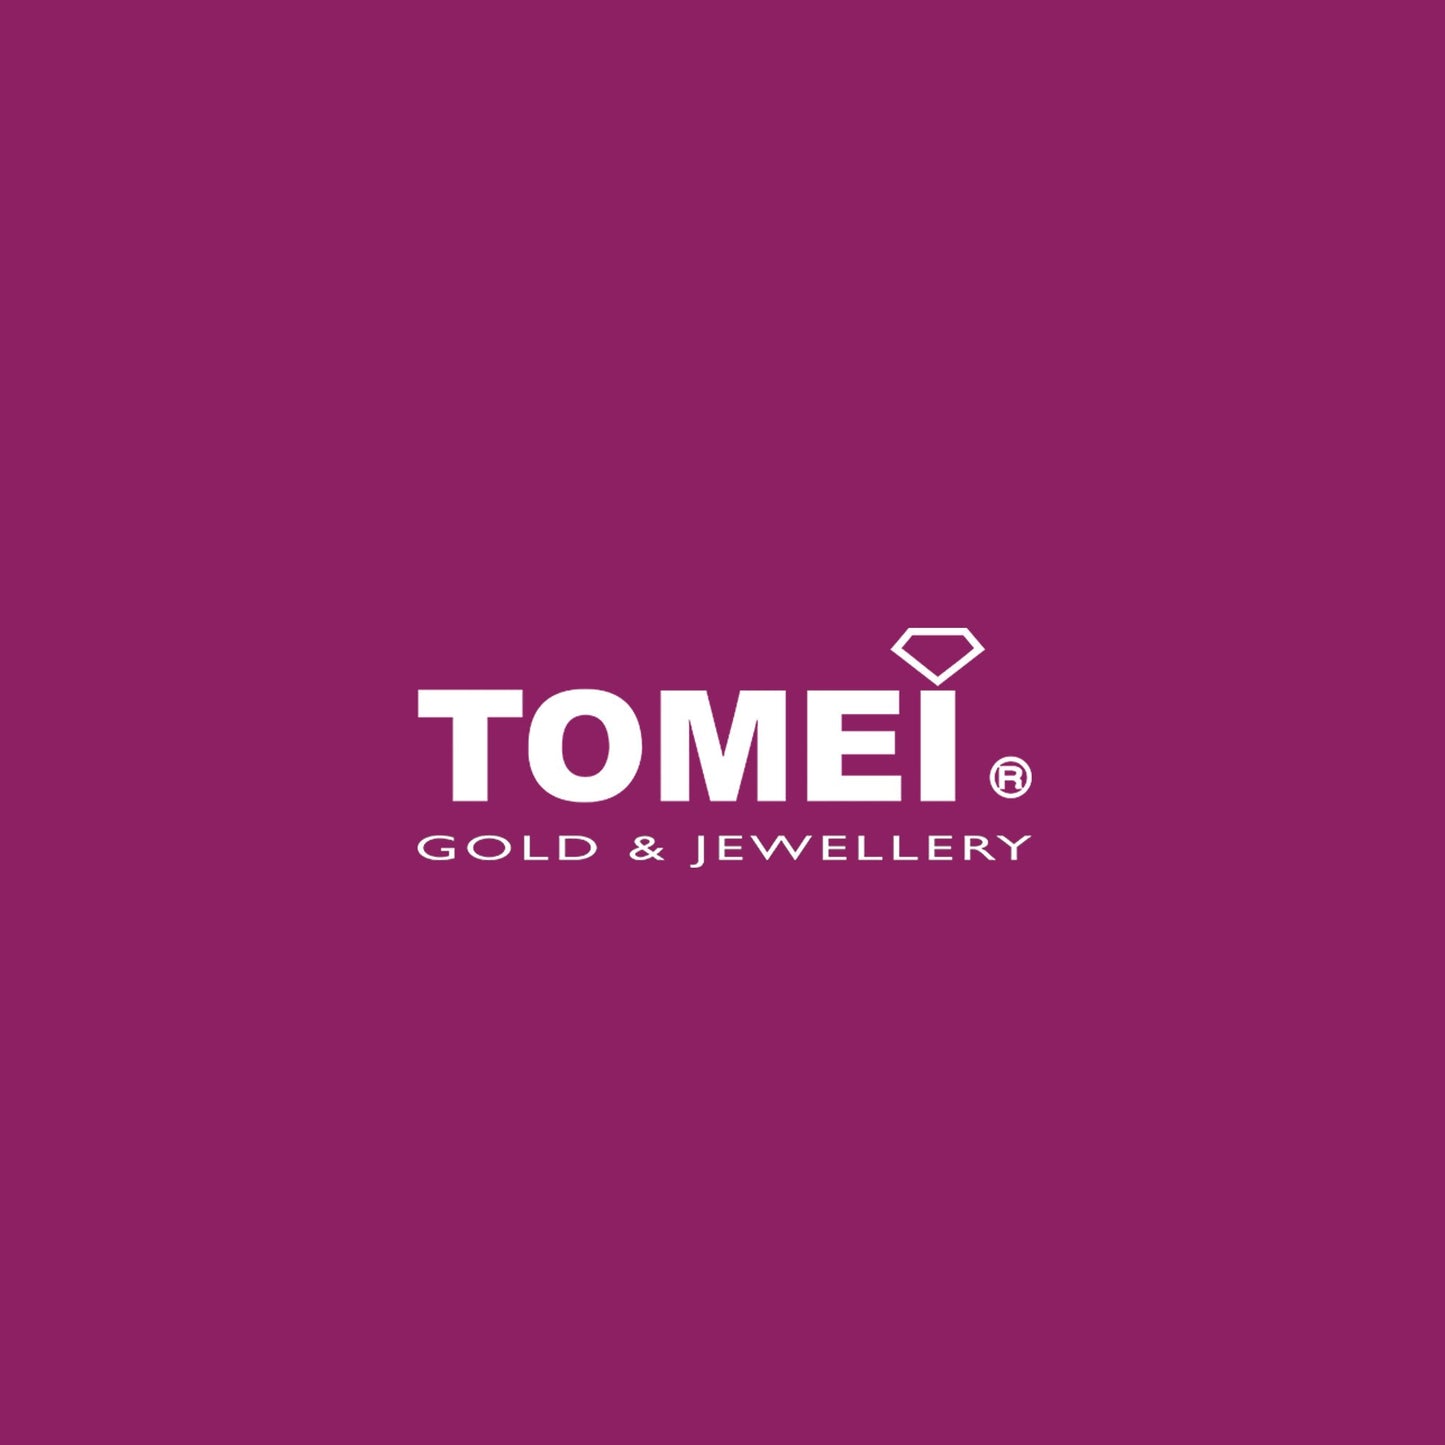 TOMEI Diamond Cut Collection Love Is Beautiful Pendant, Yellow Gold 916